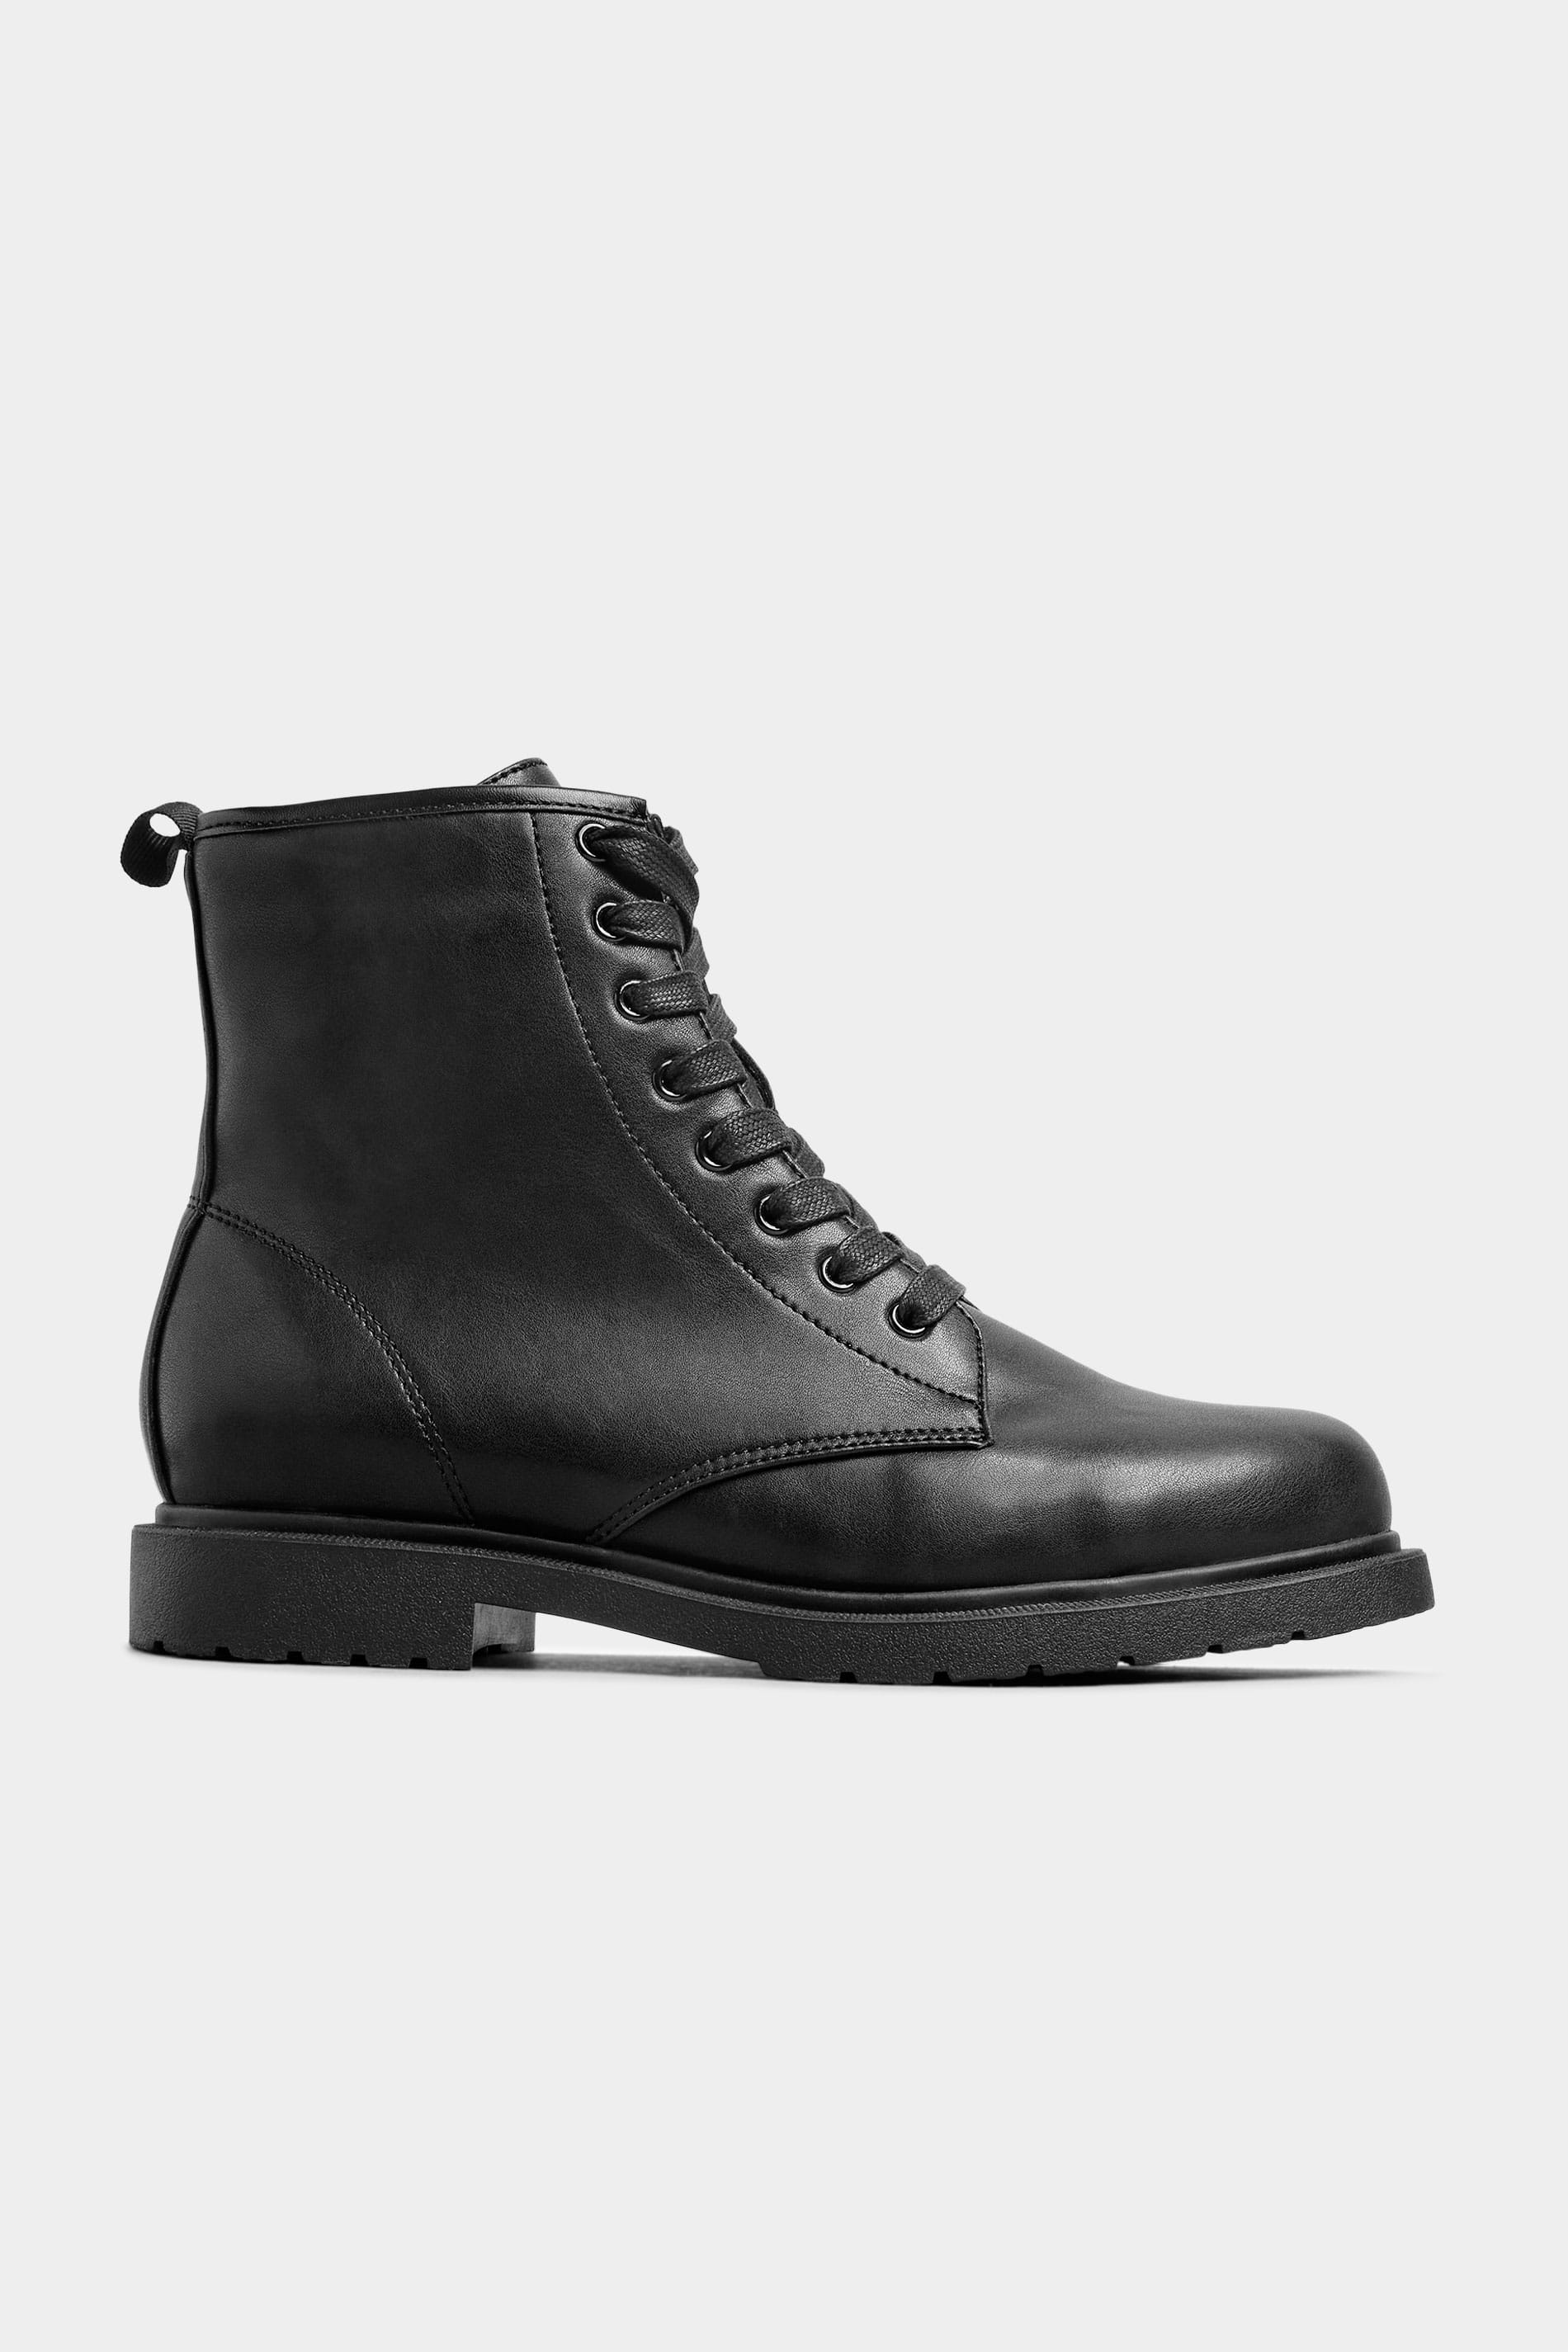 Black Vegan Faux Leather Lace Up Ankle Boots In Extra Wide Fit | Yours ...